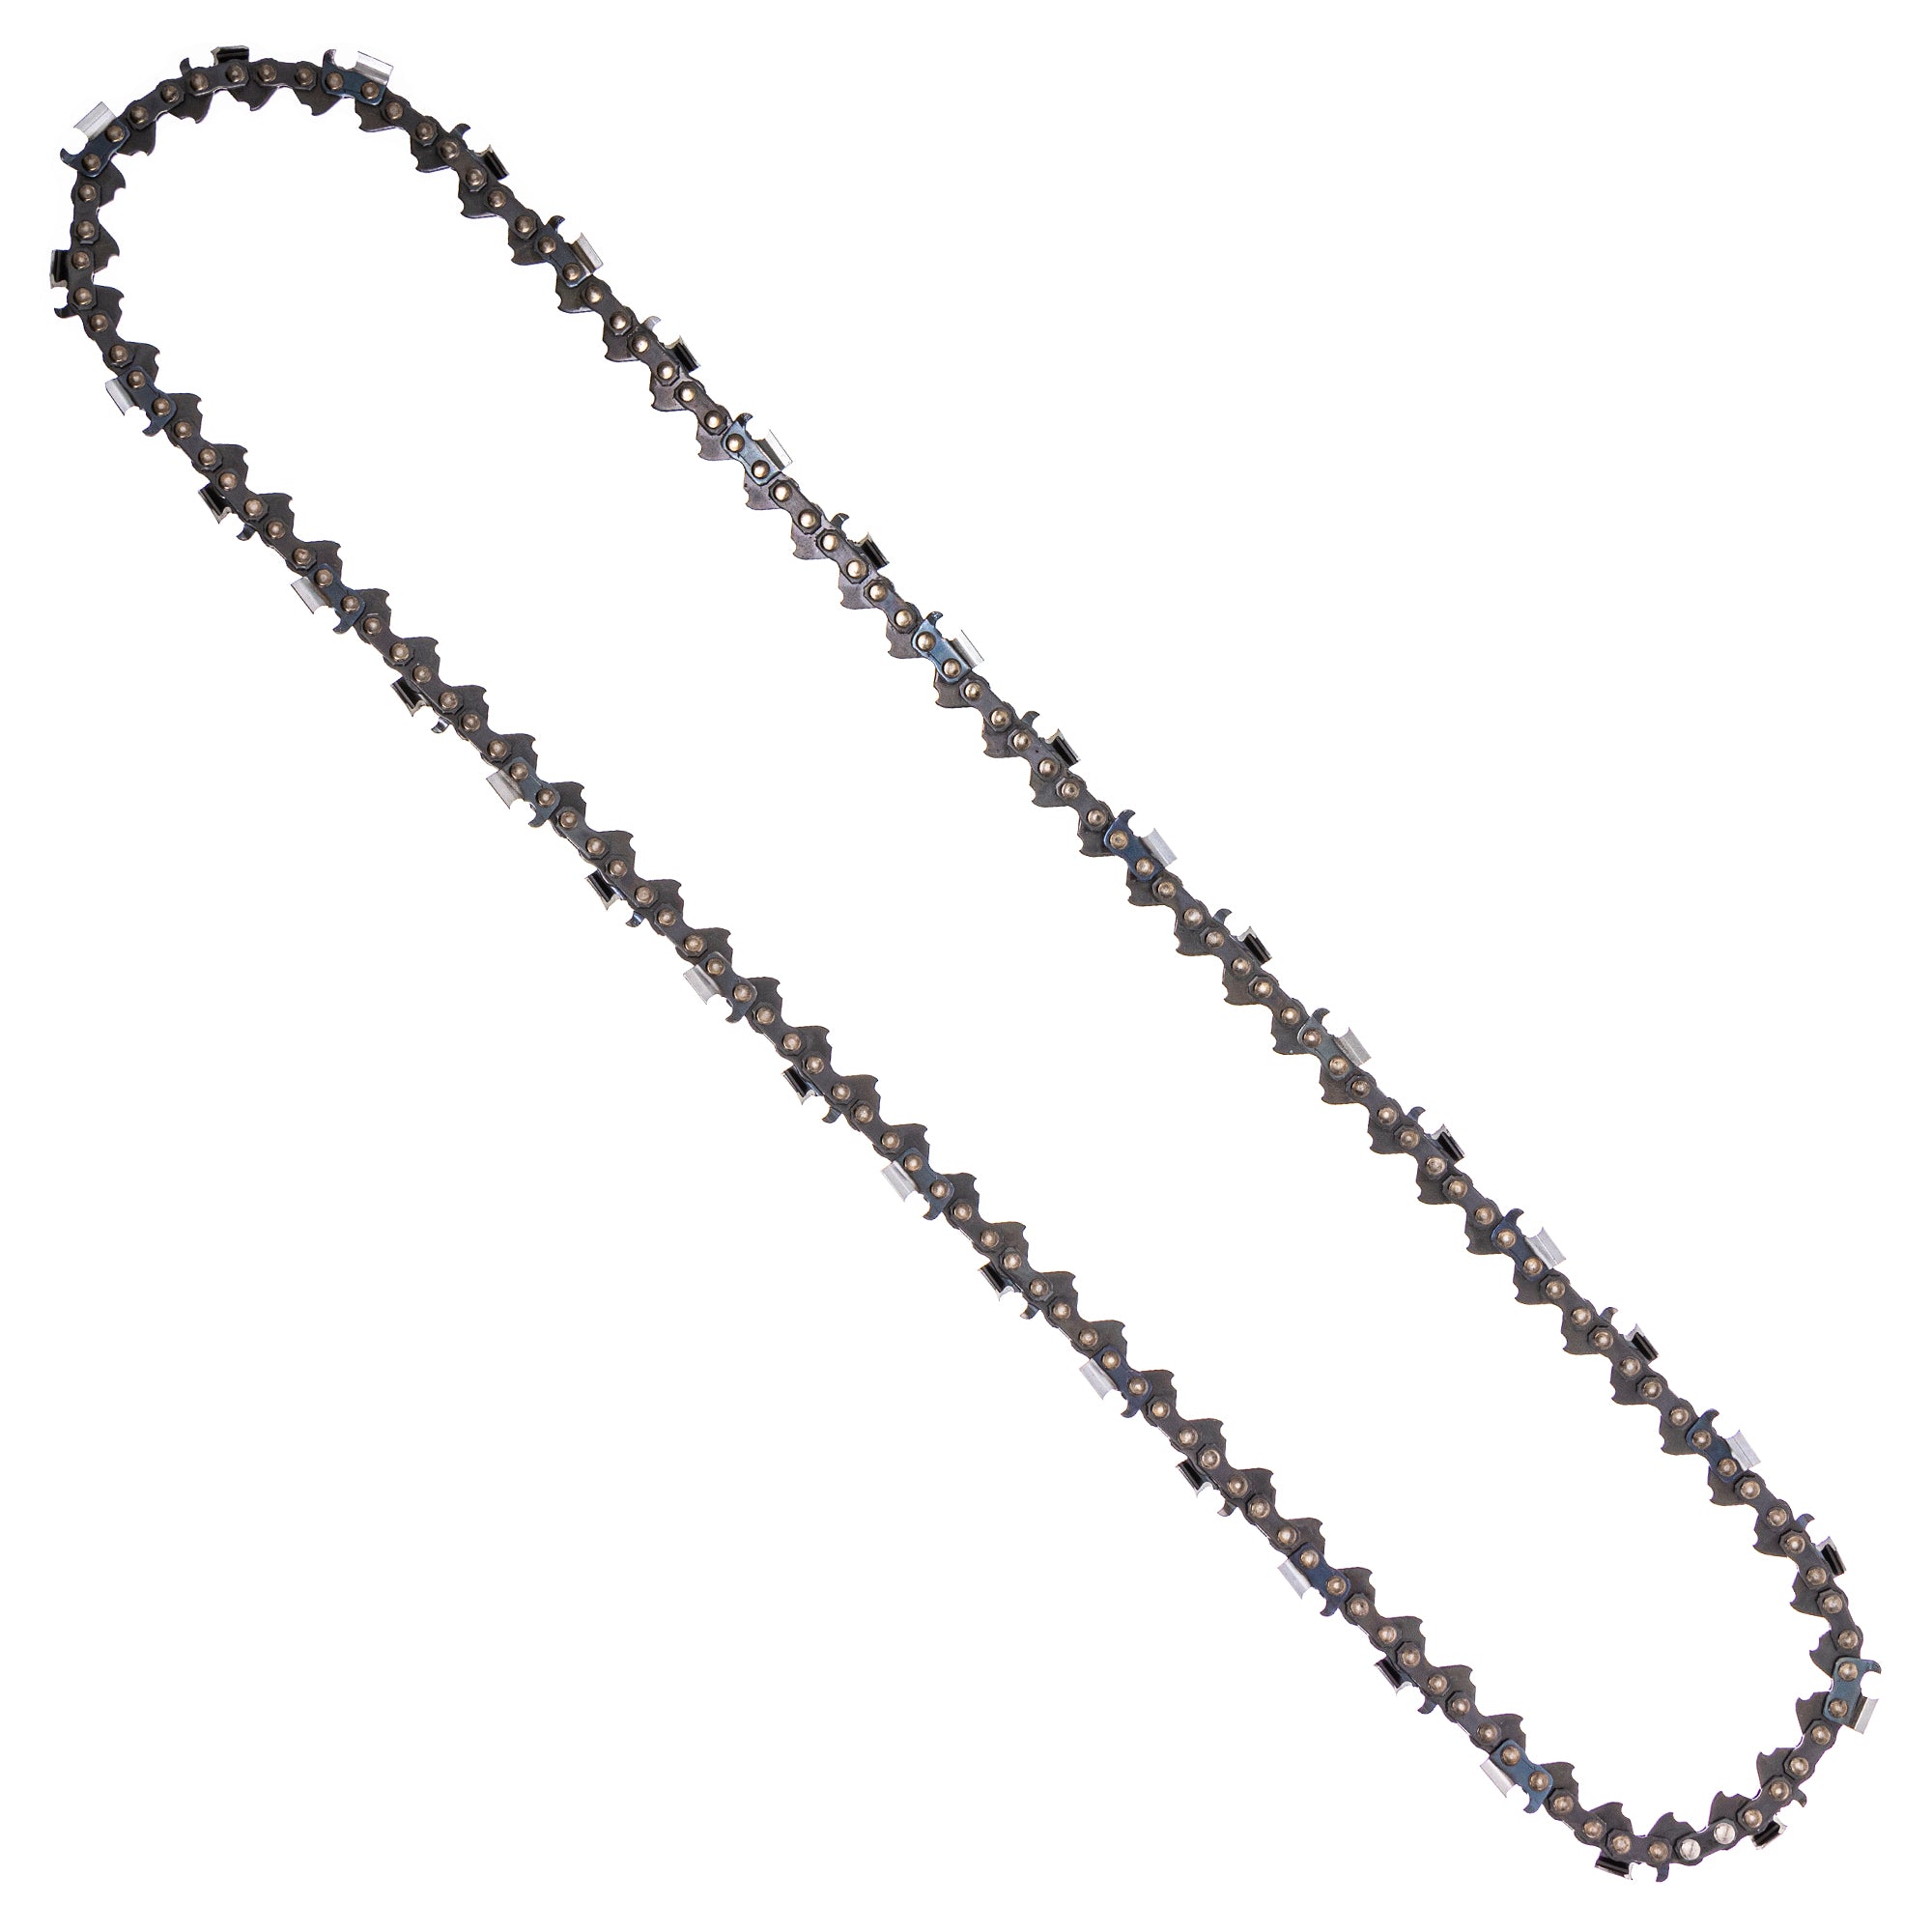 8TEN 810-CCC2221H Chain 10-Pack for zOTHER Windsor Stens Oregon GB